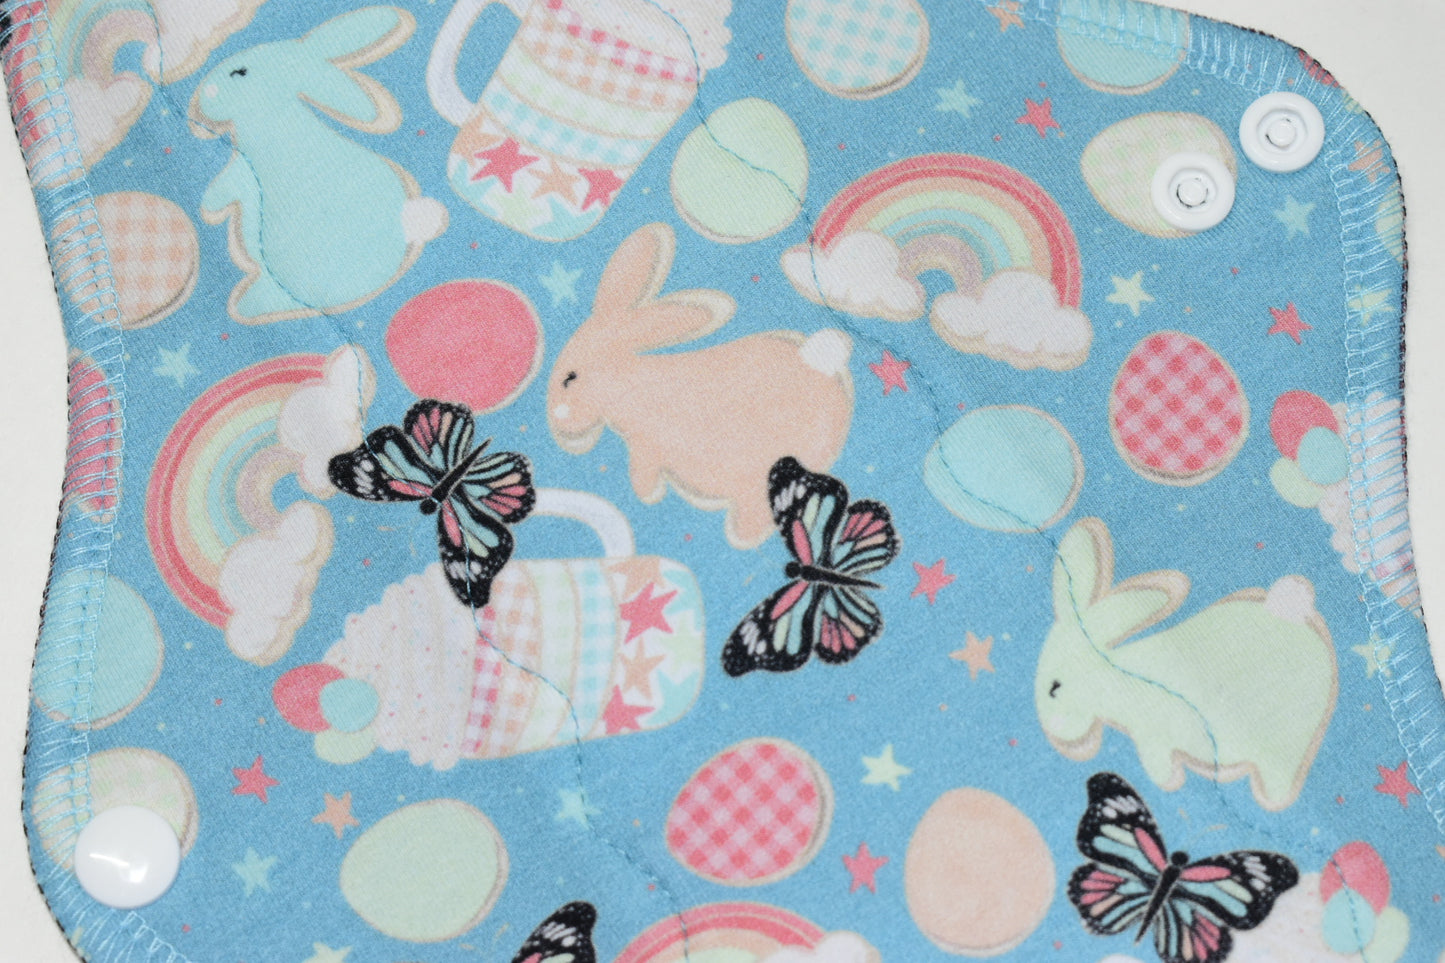 "My Milkshake Brings All The Bunnies To The Yard" *WRAP WING* Serged Cloth Pad • *New Core Method / NOT HIDDEN CORE* • Cotton Spandex Topper